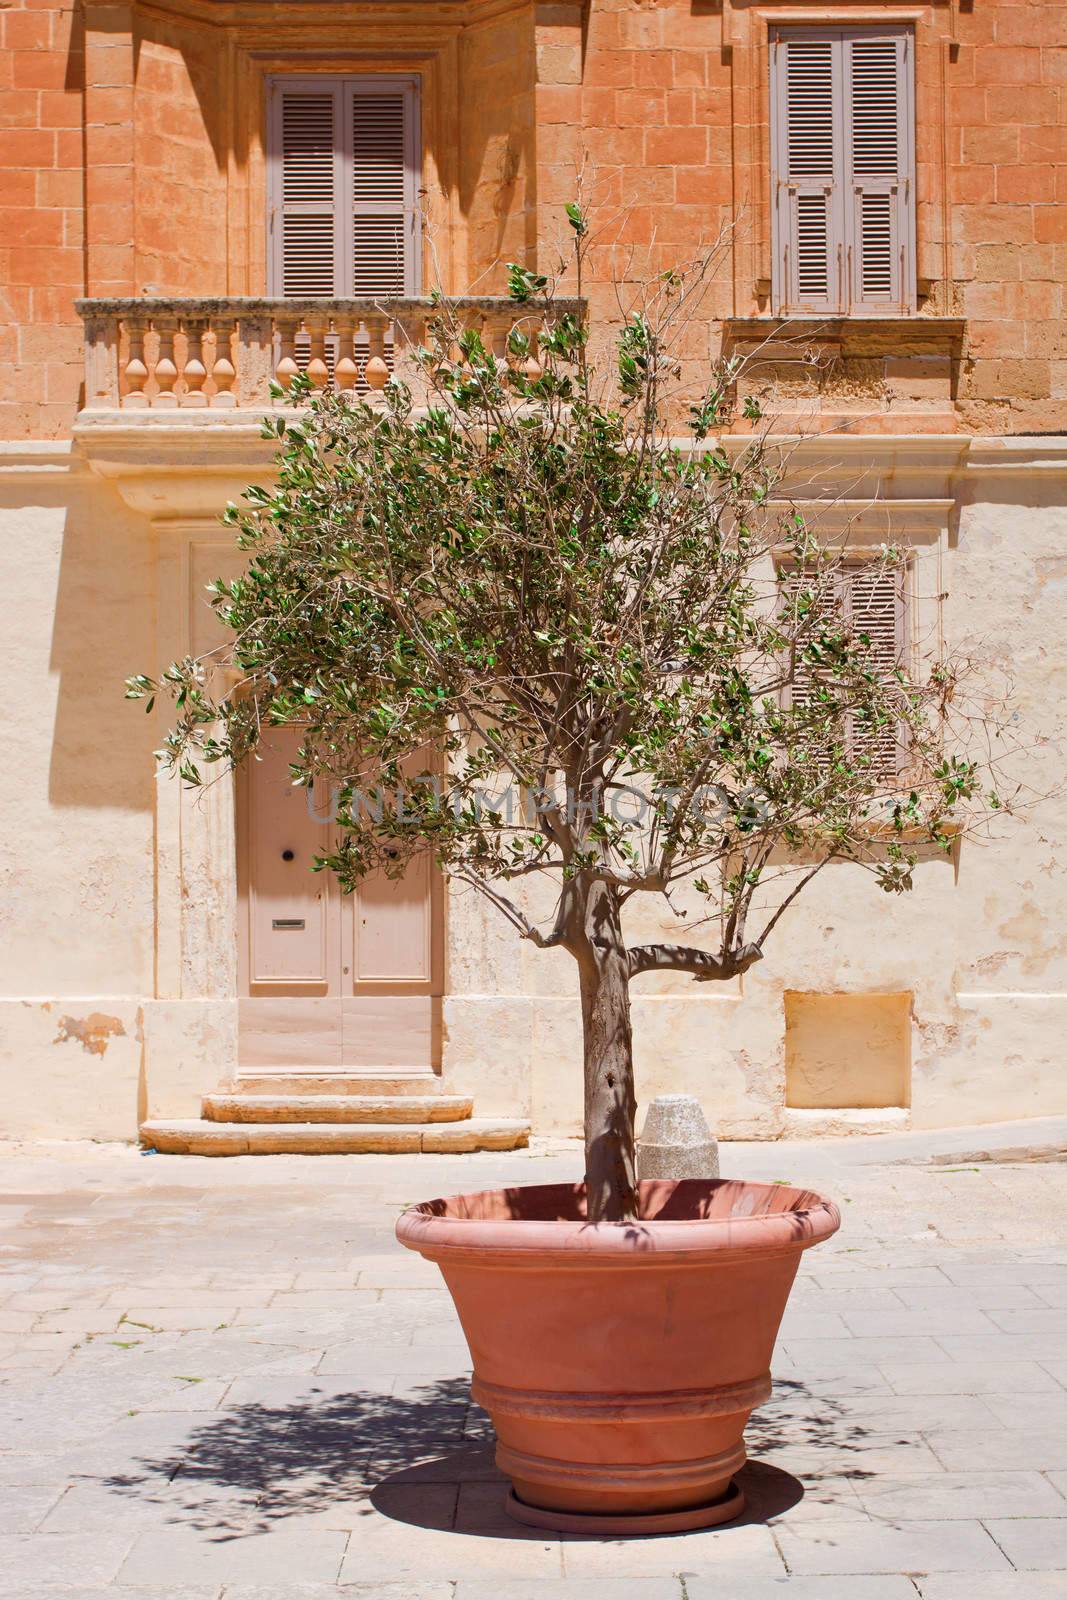 An olive tree planted in a pot and placed on the town square